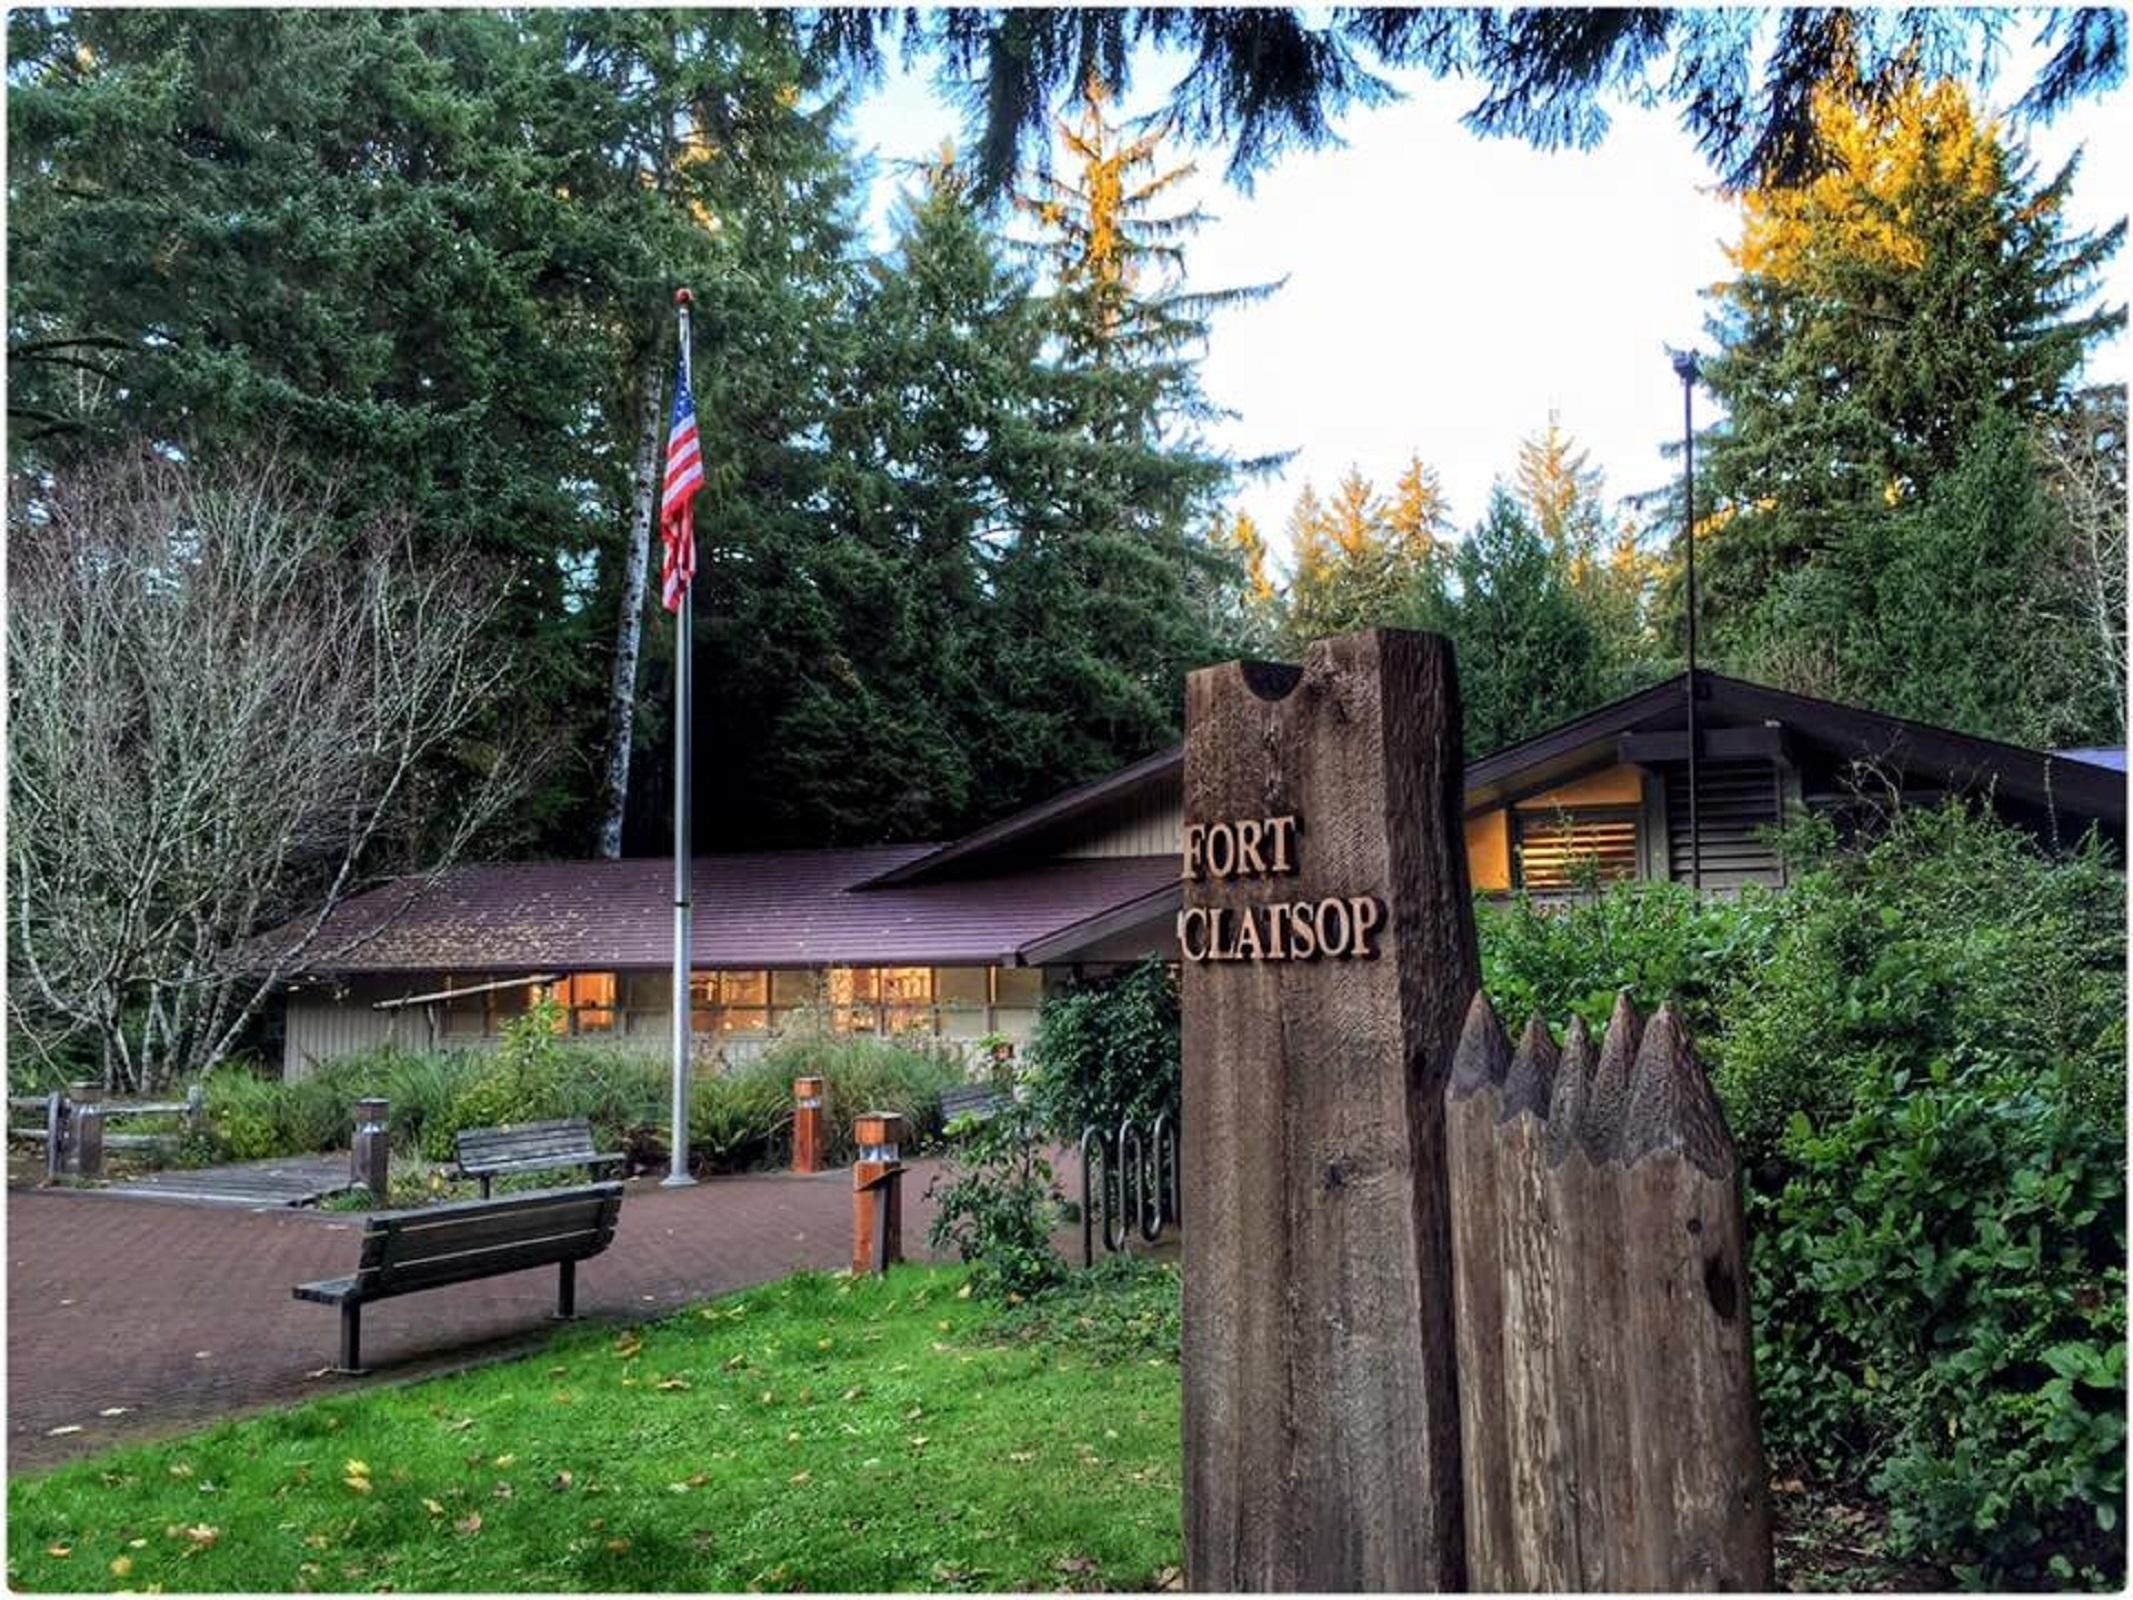 Fort Clatsop Visitor Center and Sign